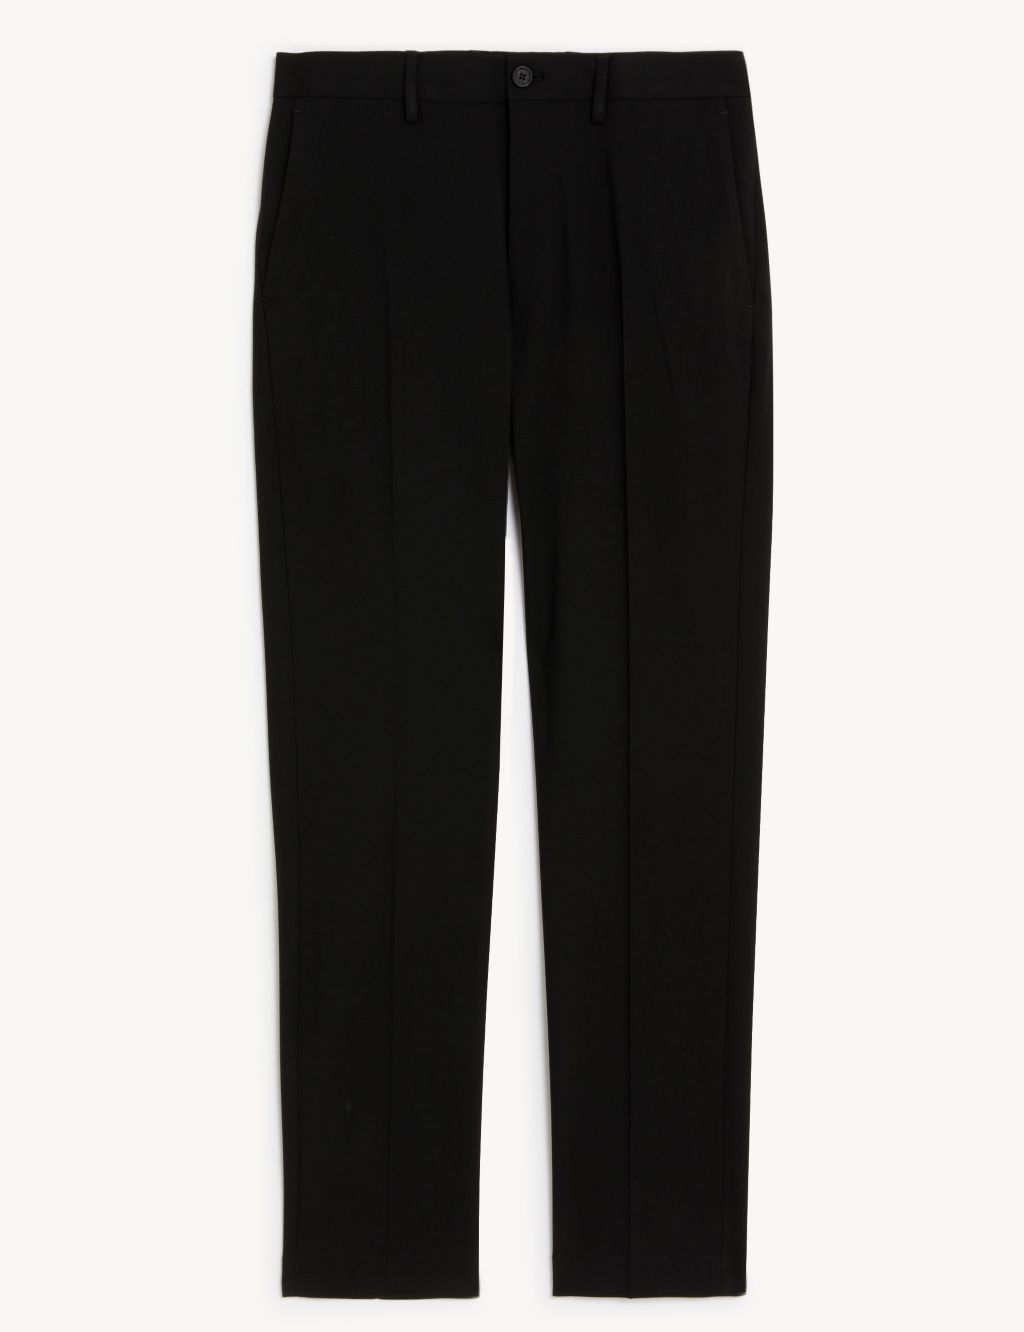 Tailored Fit Flat Front Stretch Trousers image 7